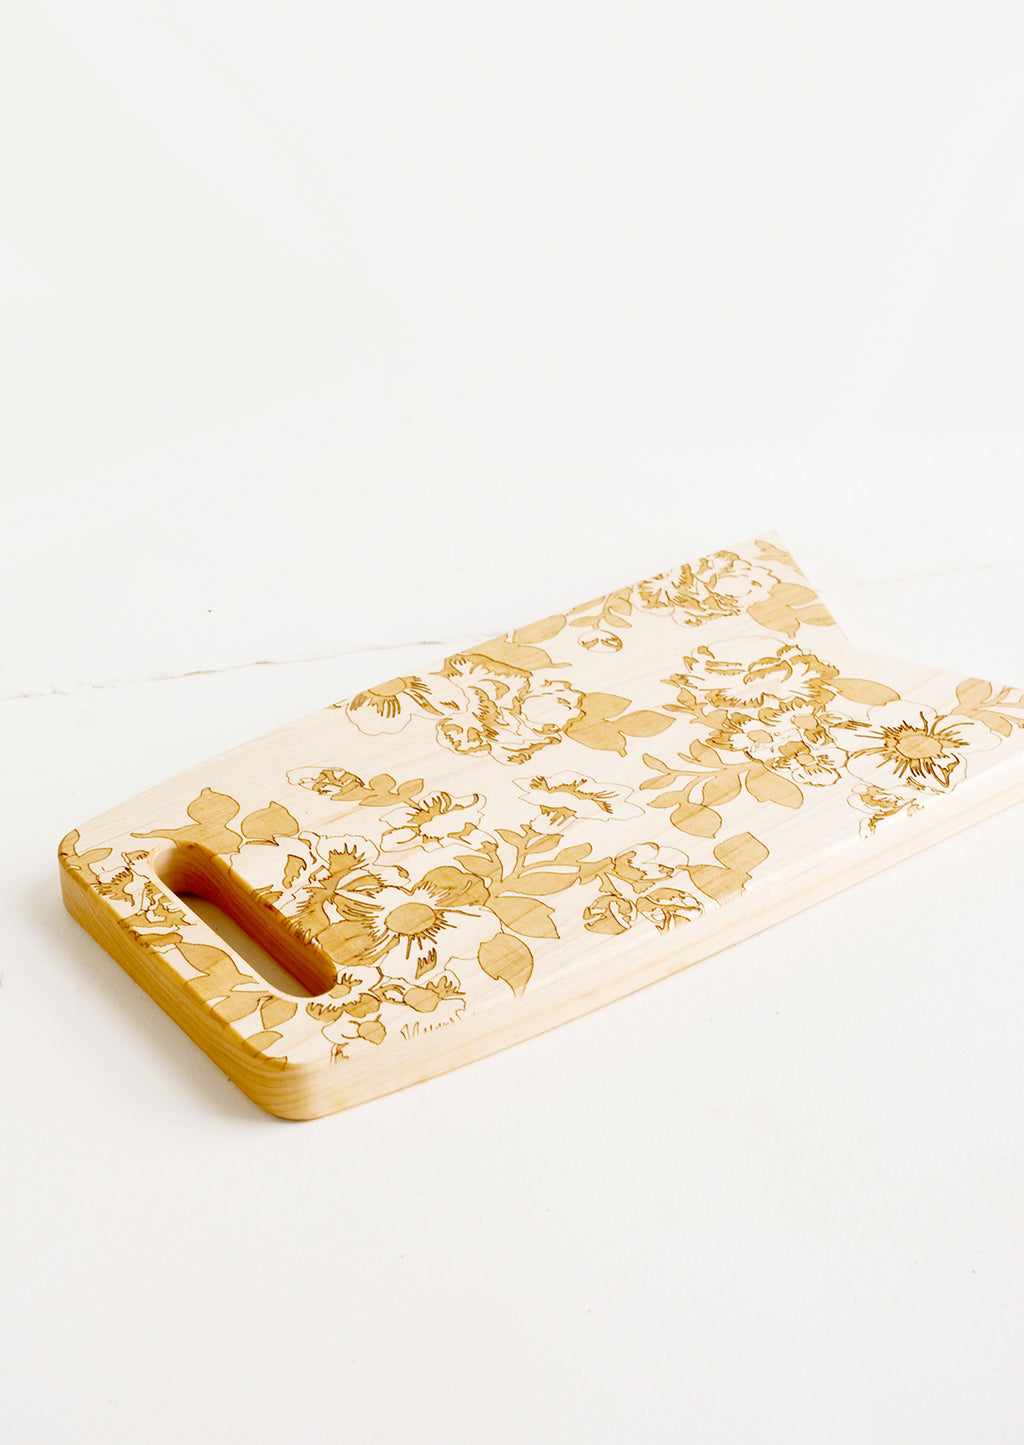 2: Flag shaped maplewood cutting board with handle cutout, lasercut floral pattern